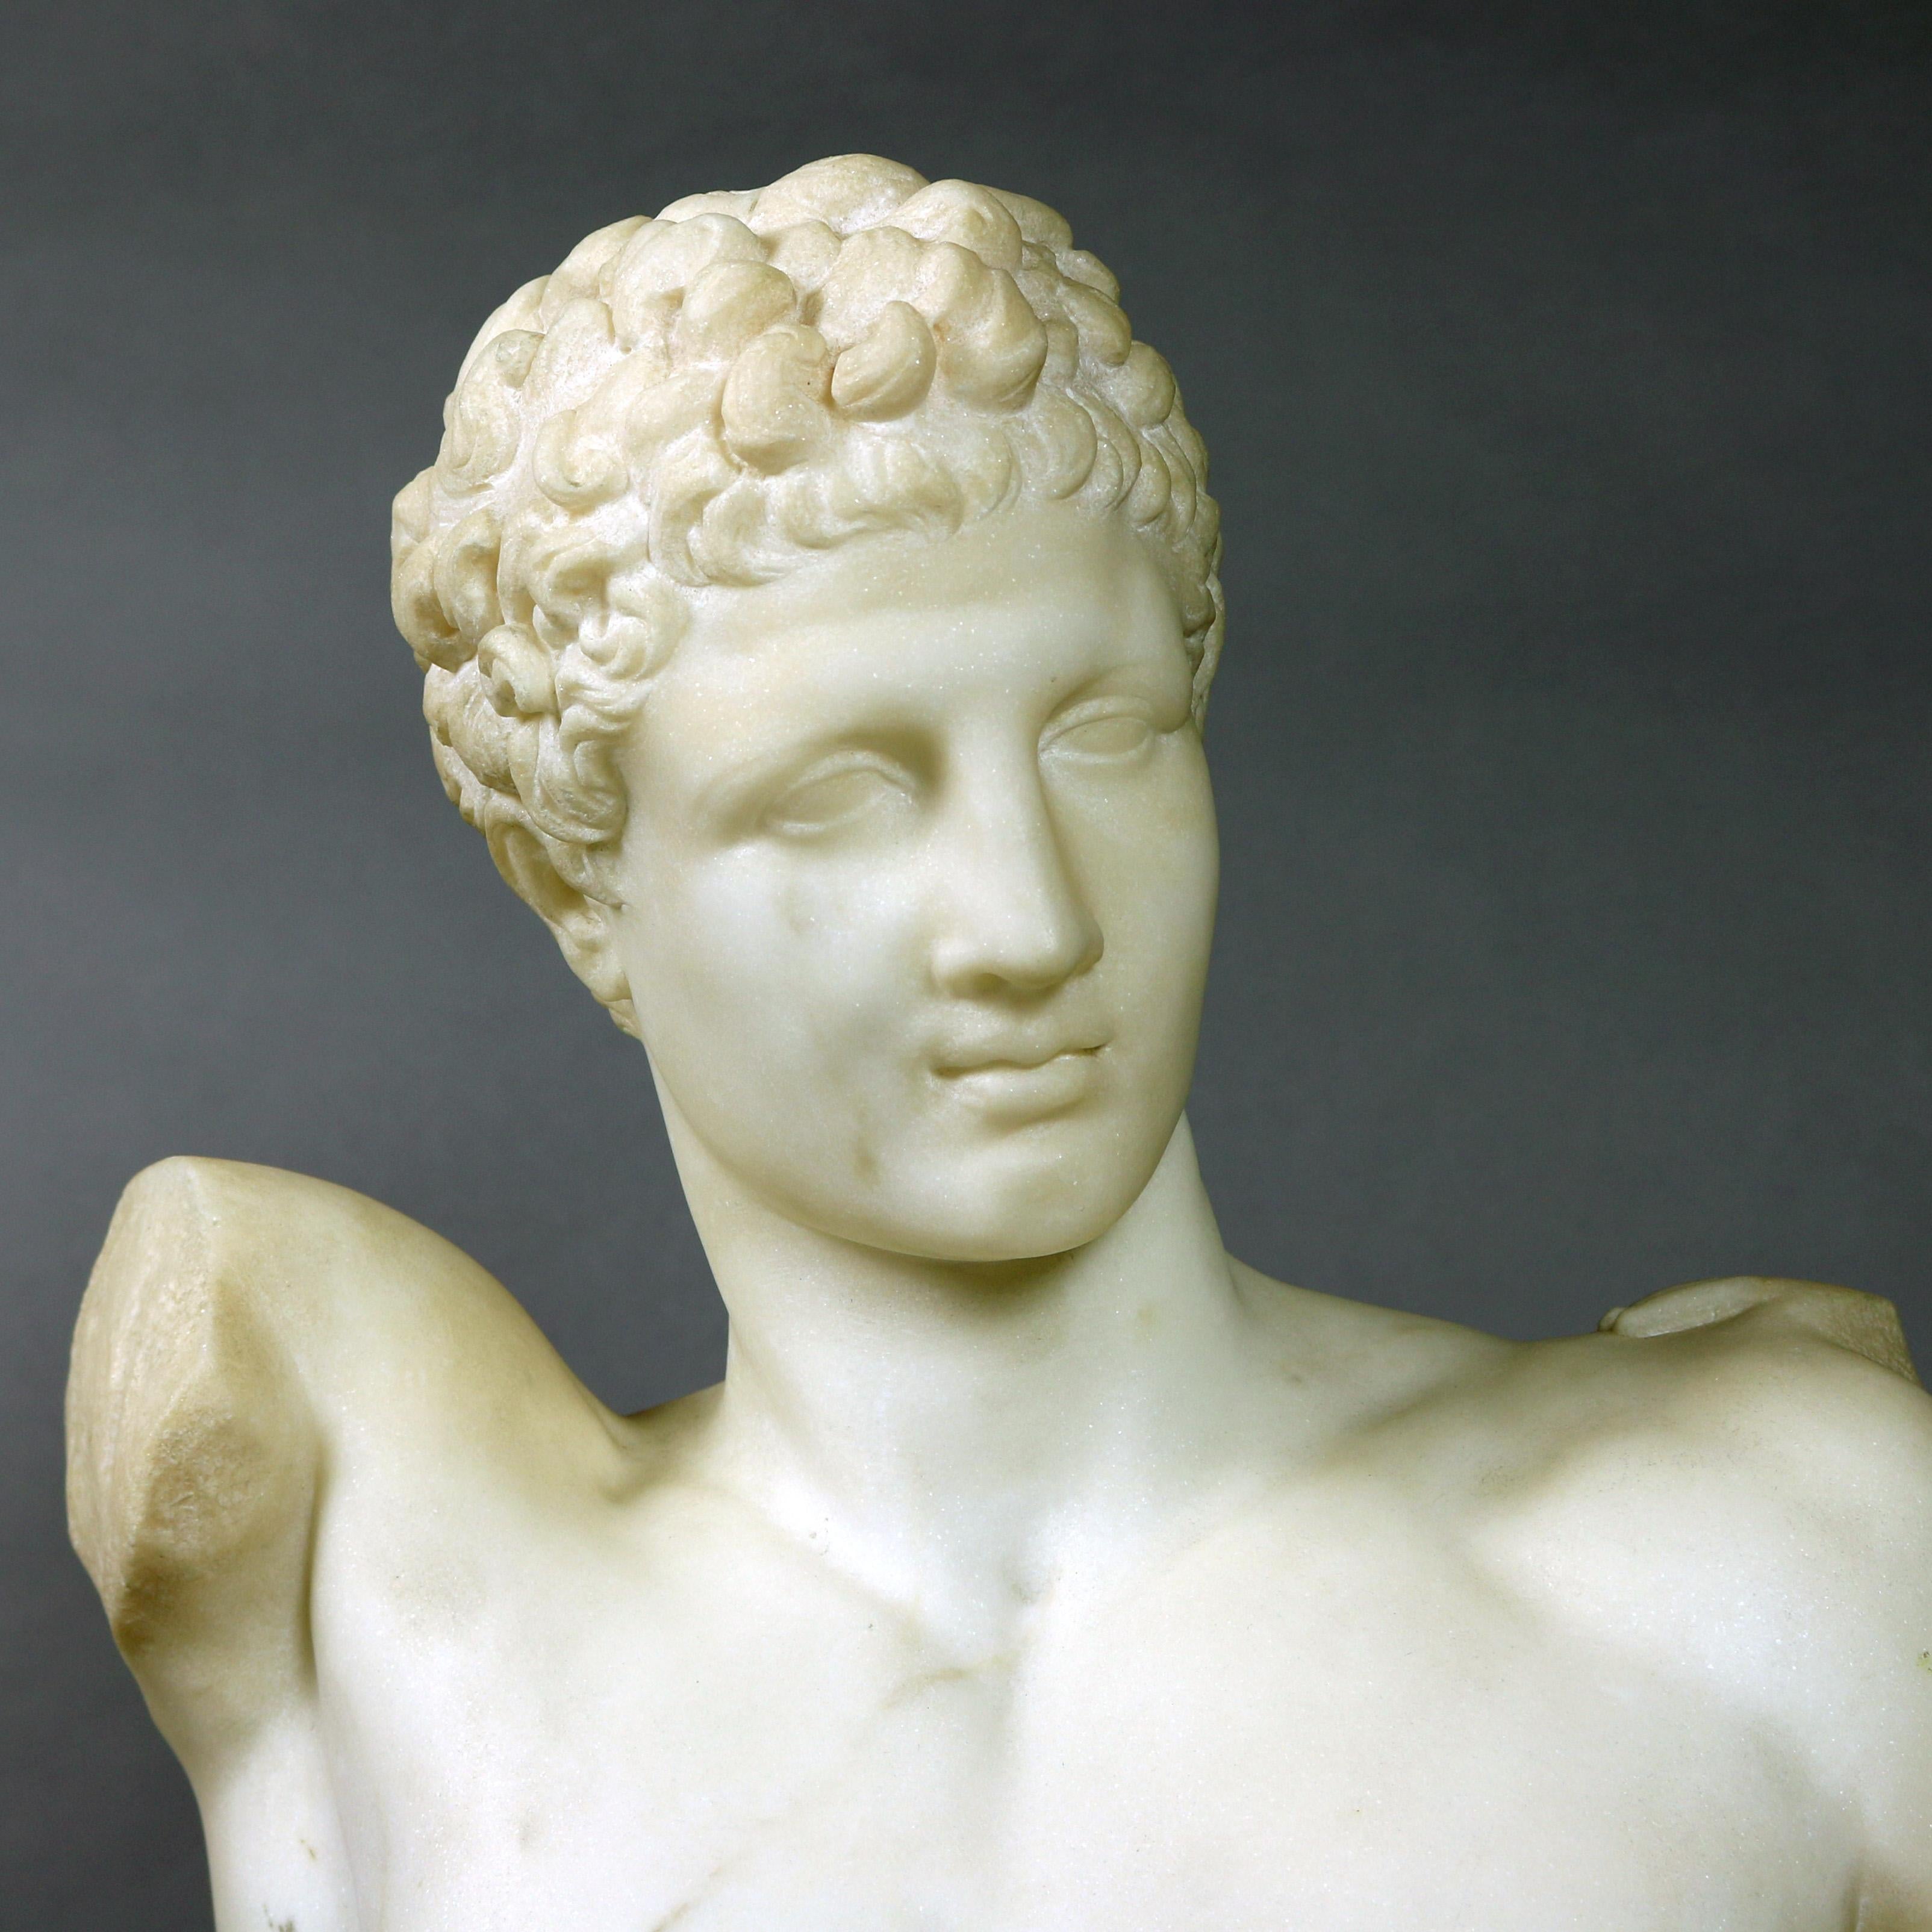 An antique Classical Italian carved marble portrait bust of Greek God Hermes after original by Praxiteles, seated on stepped plinth, 19th century

Measures: 20.25